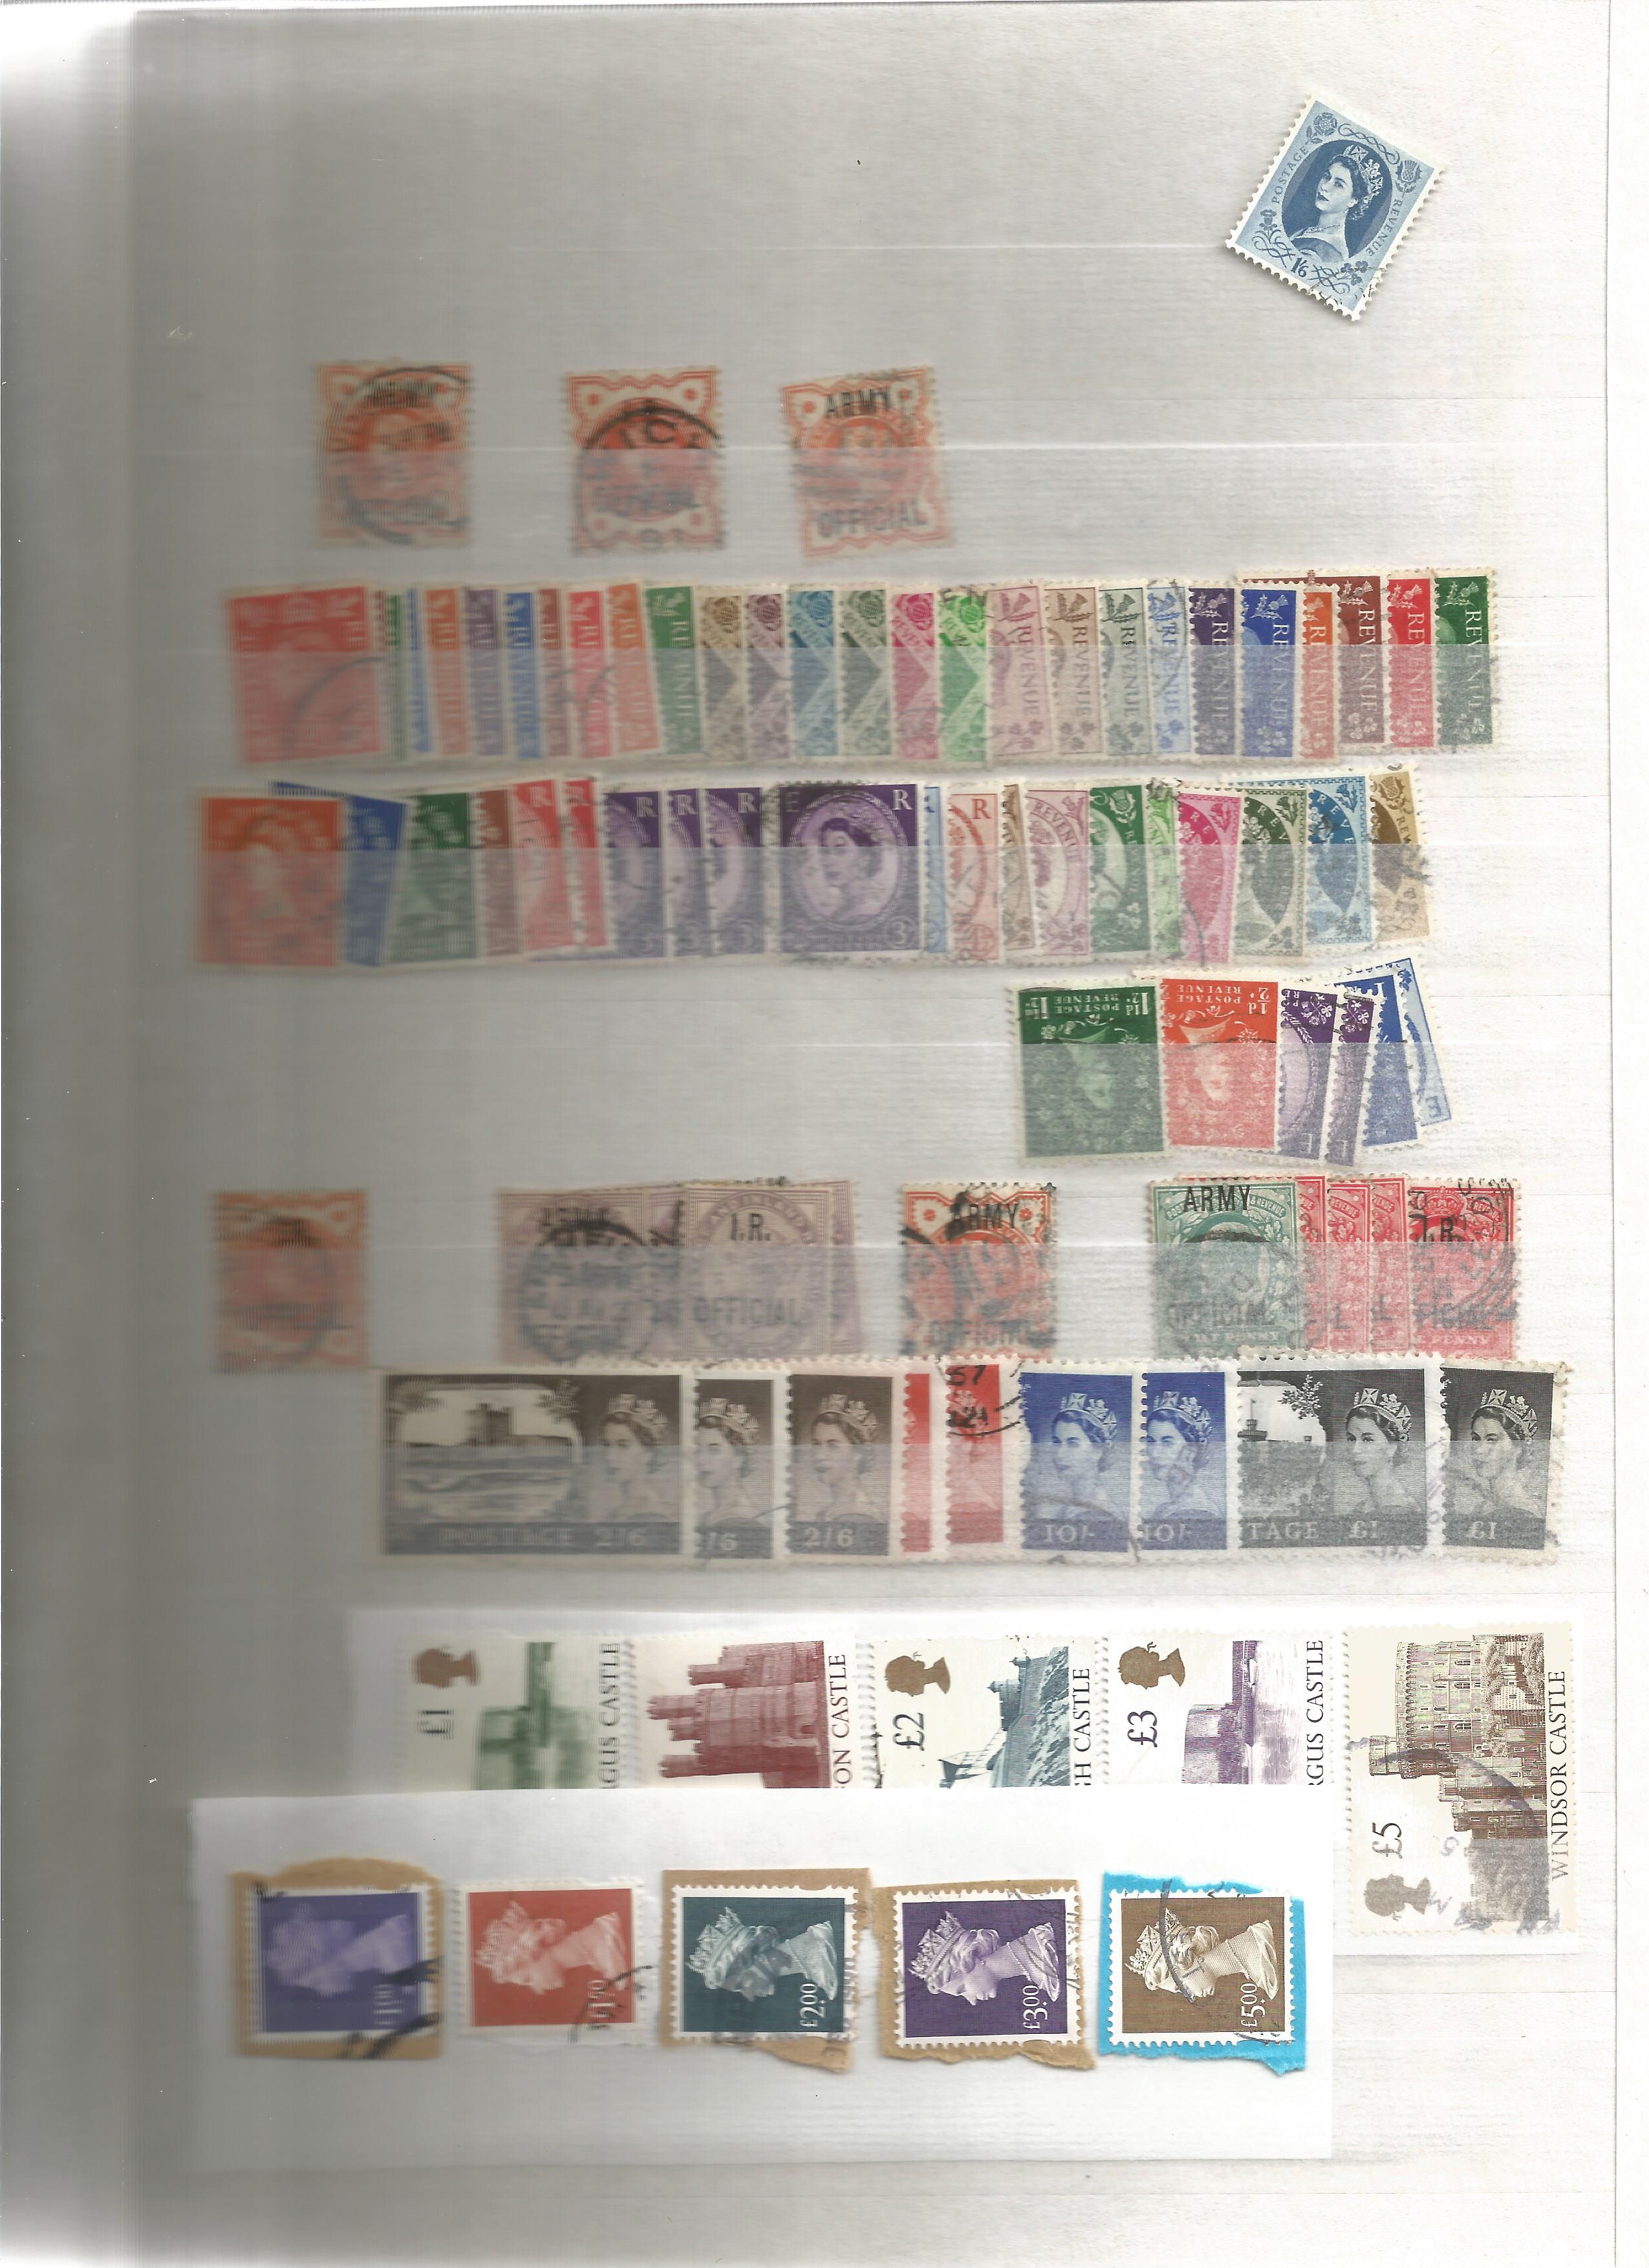 GB Stamps Used and unused WH Smiths Album with 16 pages and 10 rows each side, Includes 17 Miniature - Image 2 of 3